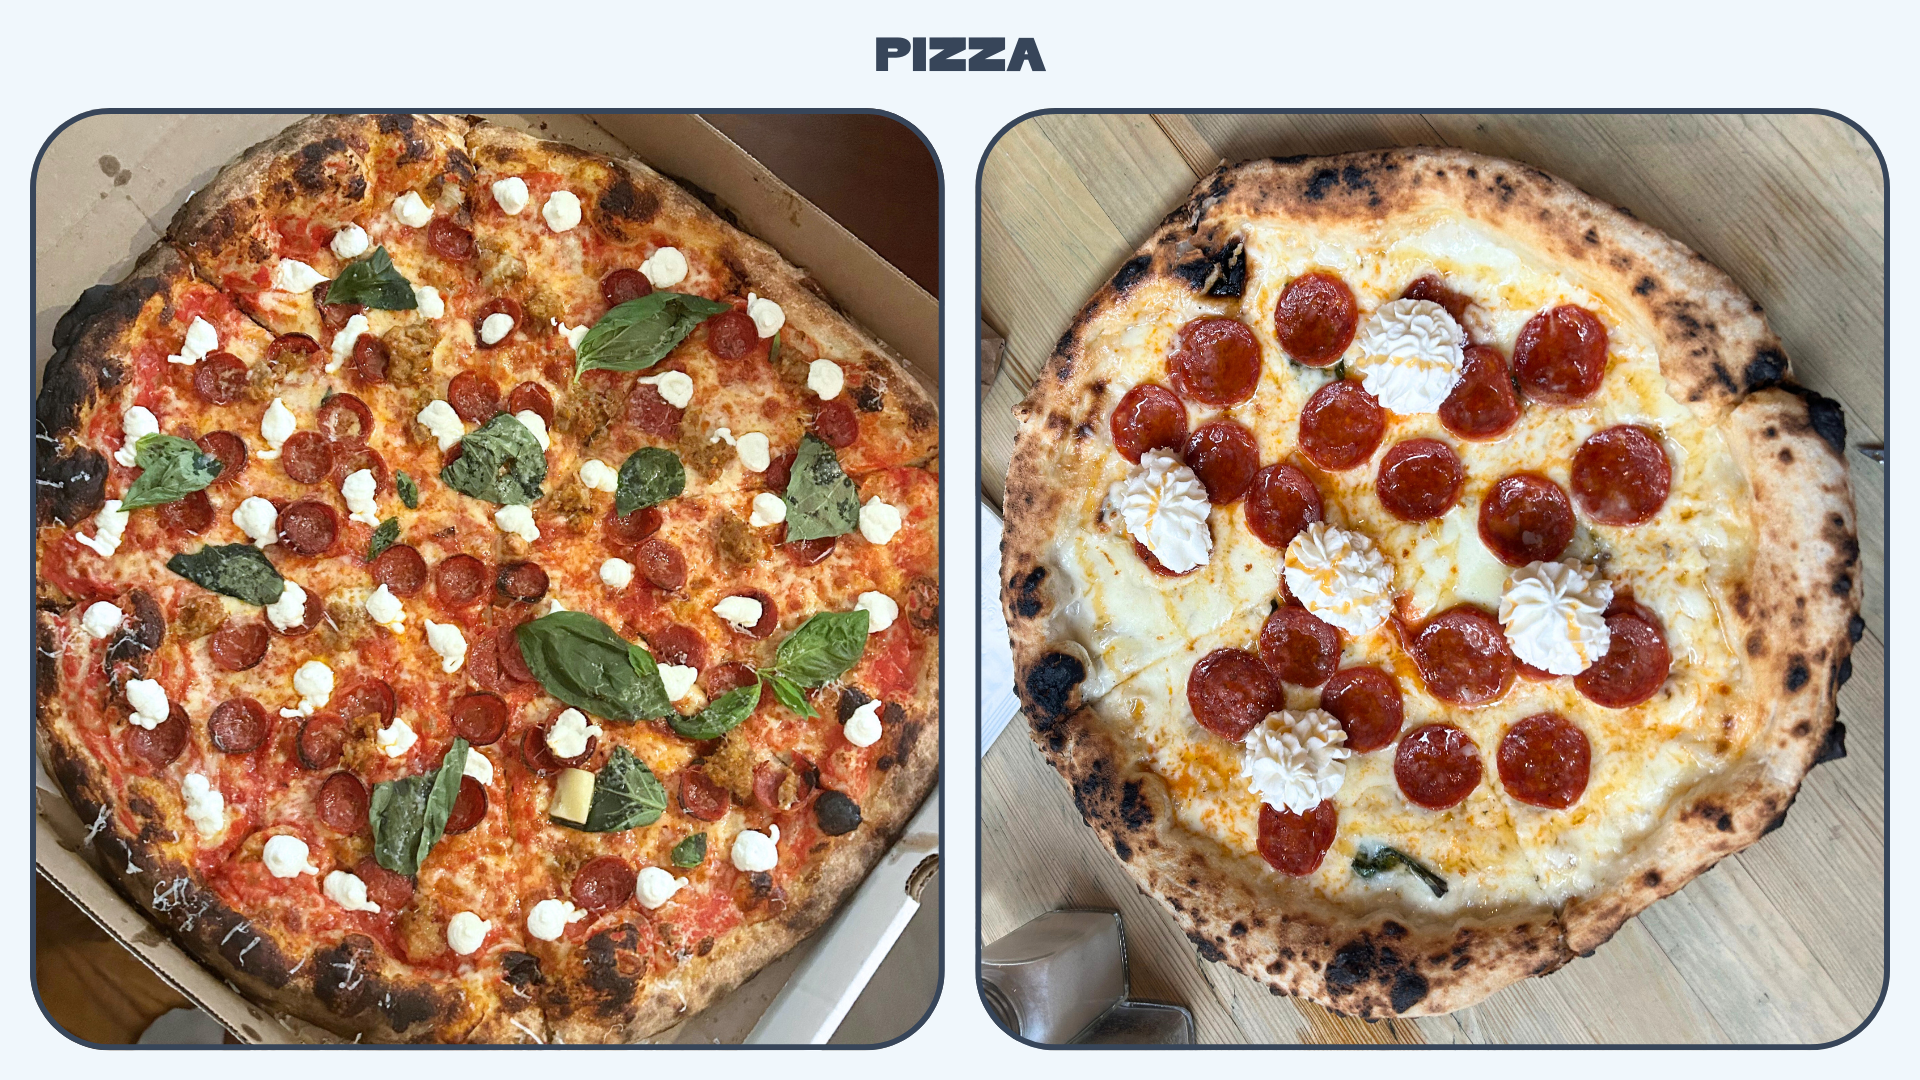 Pizza from L'Industrie (left) and San Matteo (right)